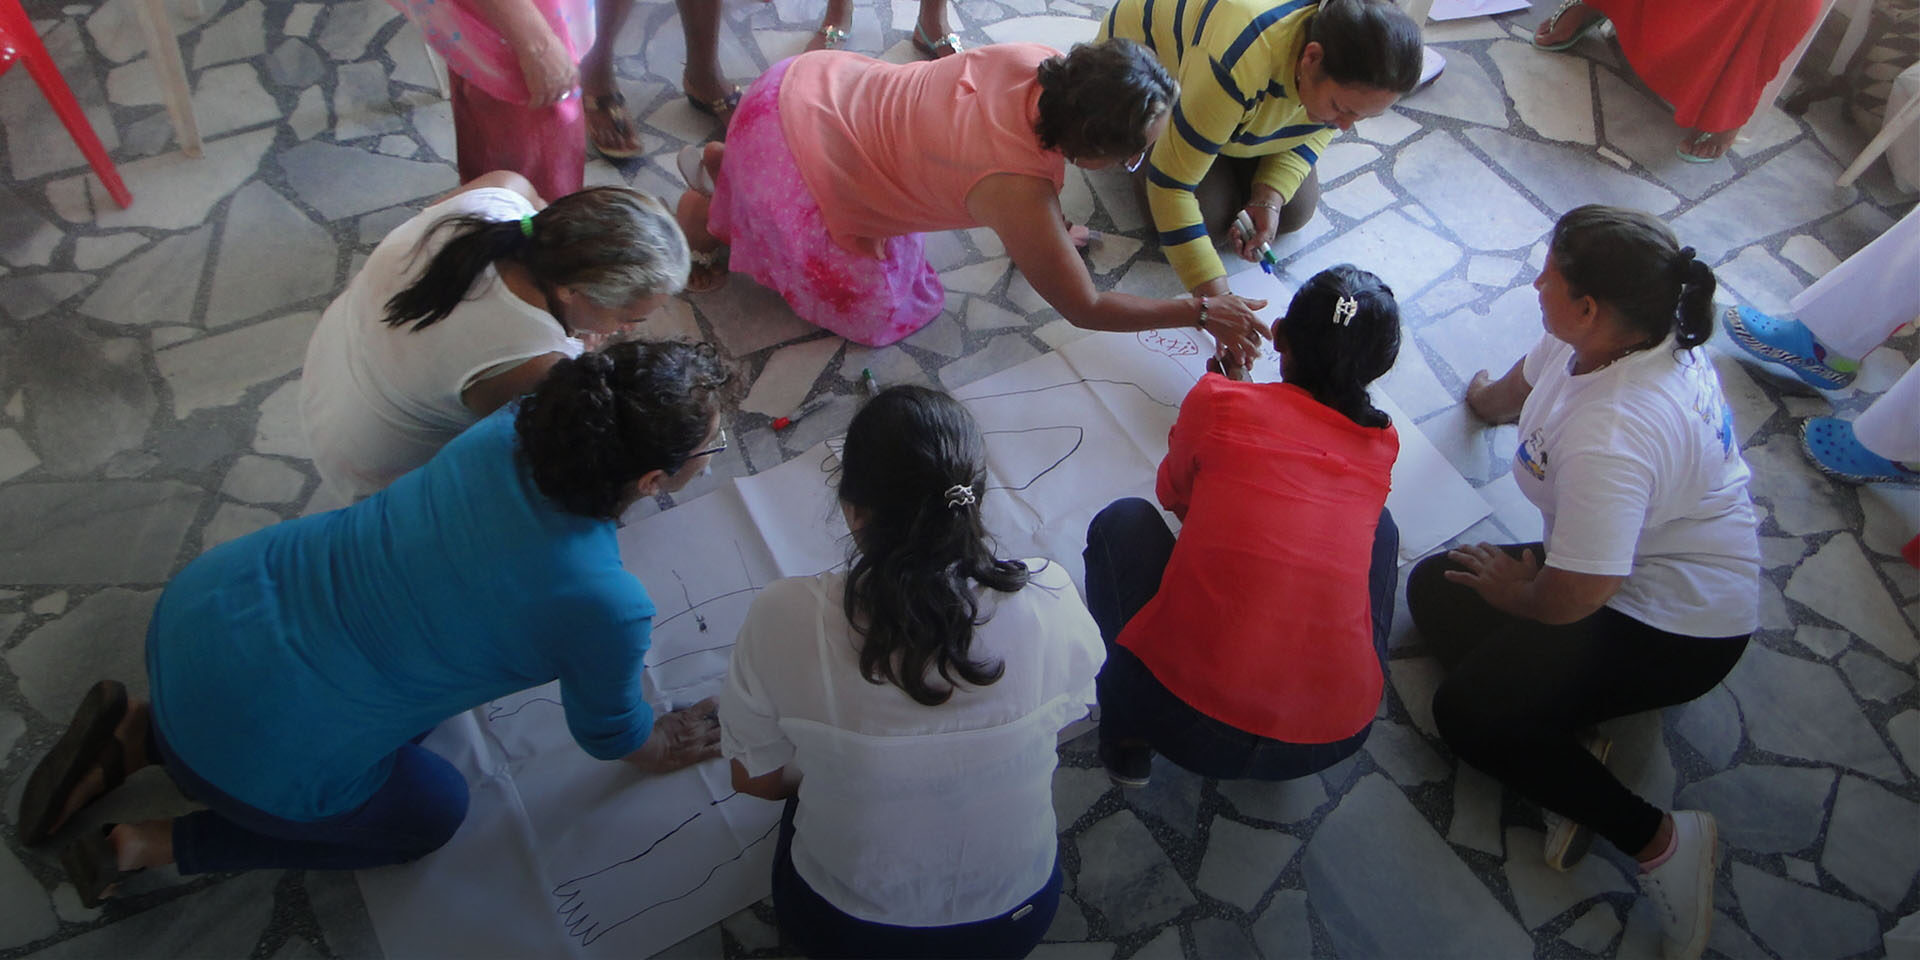 Image of several people kneeling around a drawing of a person and working together to solve an educational exercise.